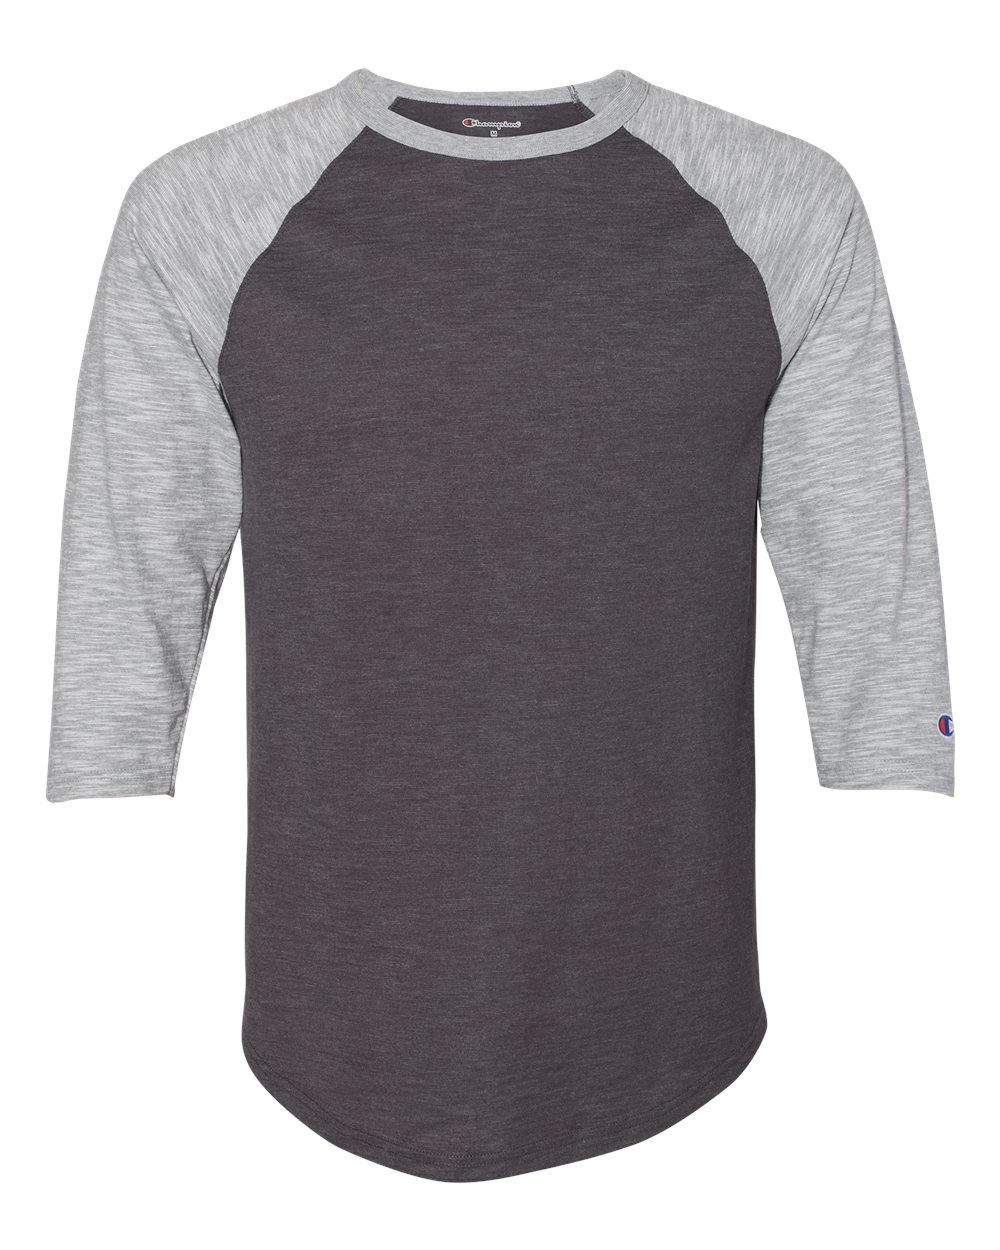 click to view Charcoal Heather/ Oxford Grey